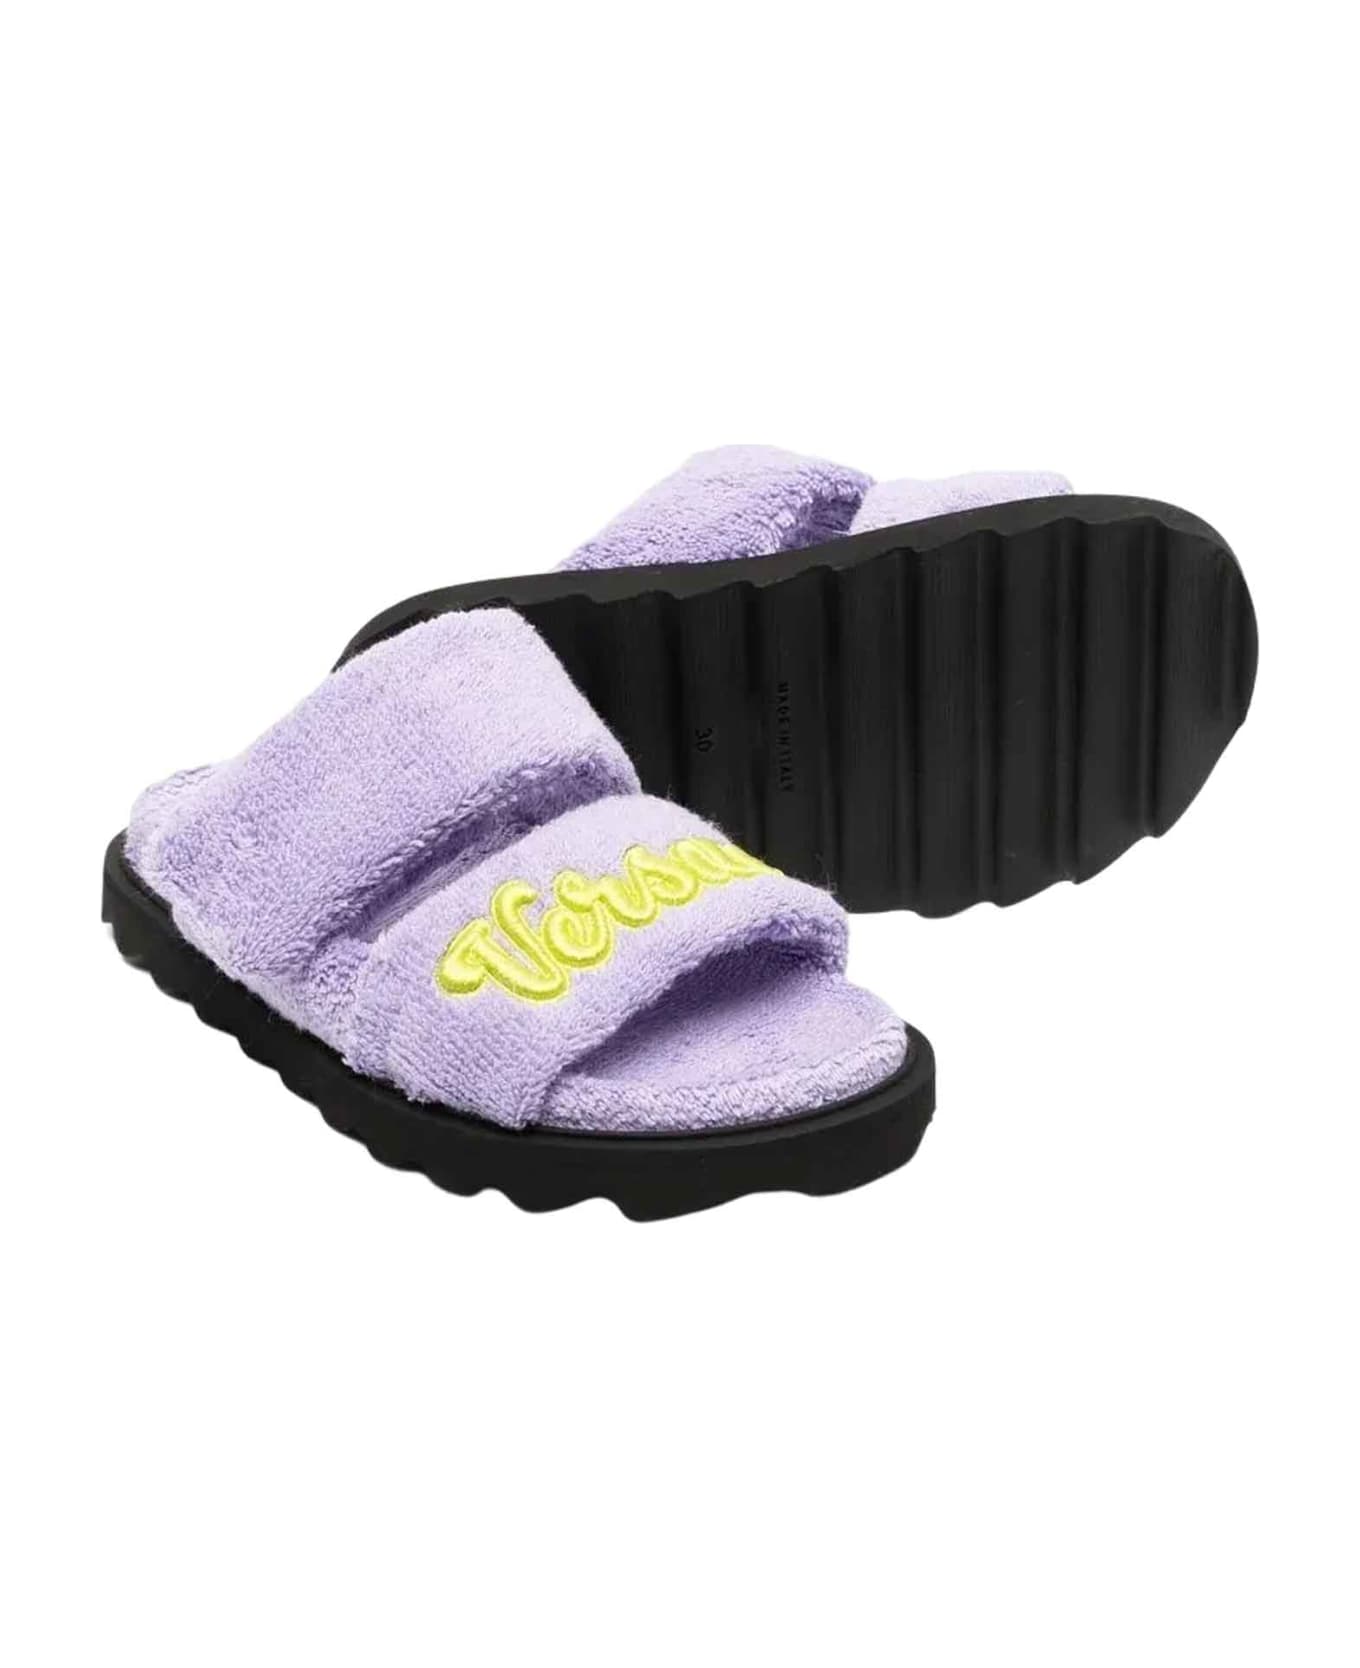 Young Versace Lilac/lime Sandals Unisex Kids - Baby Violet Acid Lime